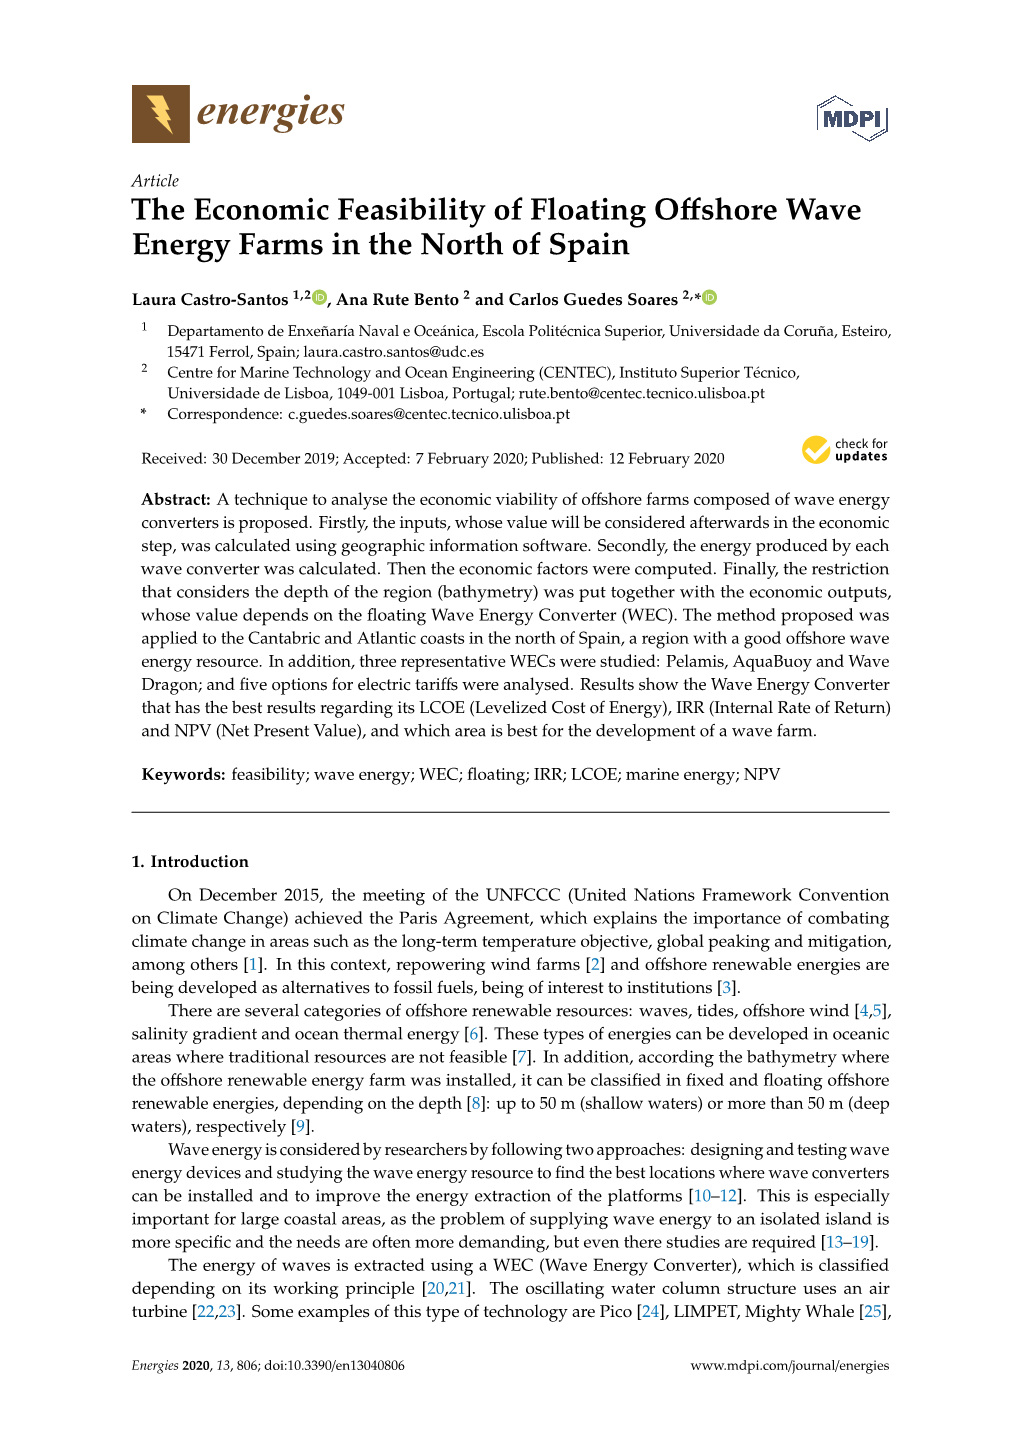 The Economic Feasibility of Floating Offshore Wave Energy Farms in The